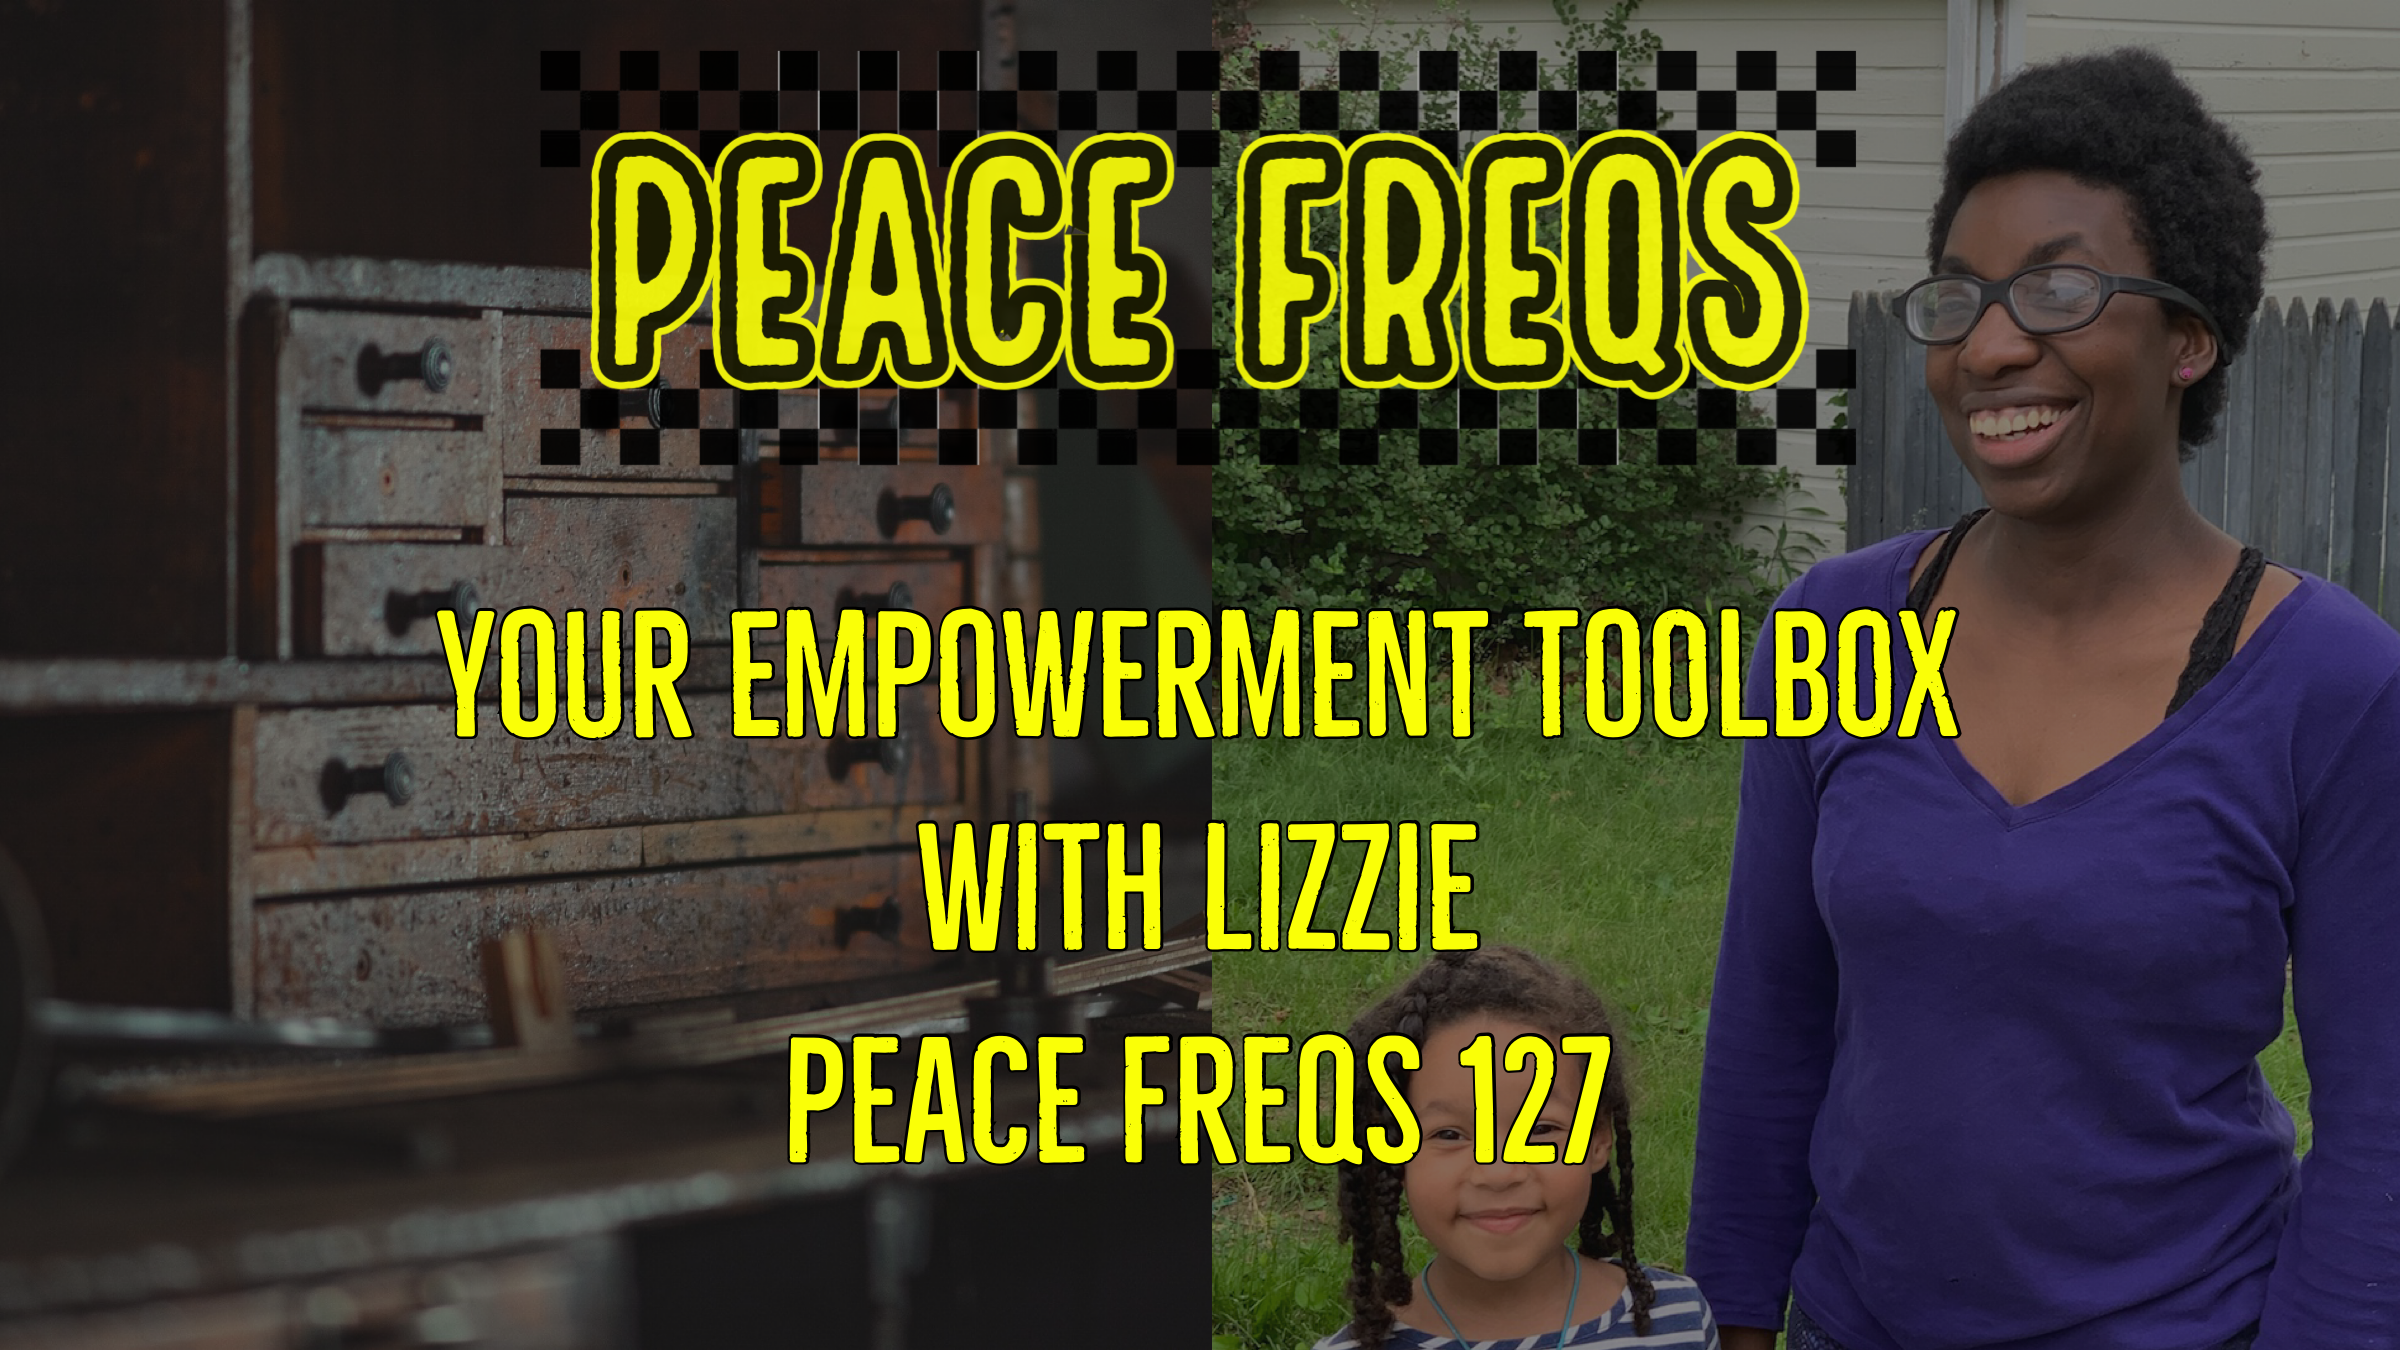 Your Empowerment Toolbox with Lizzie - Peace Freqs 127 Title Card